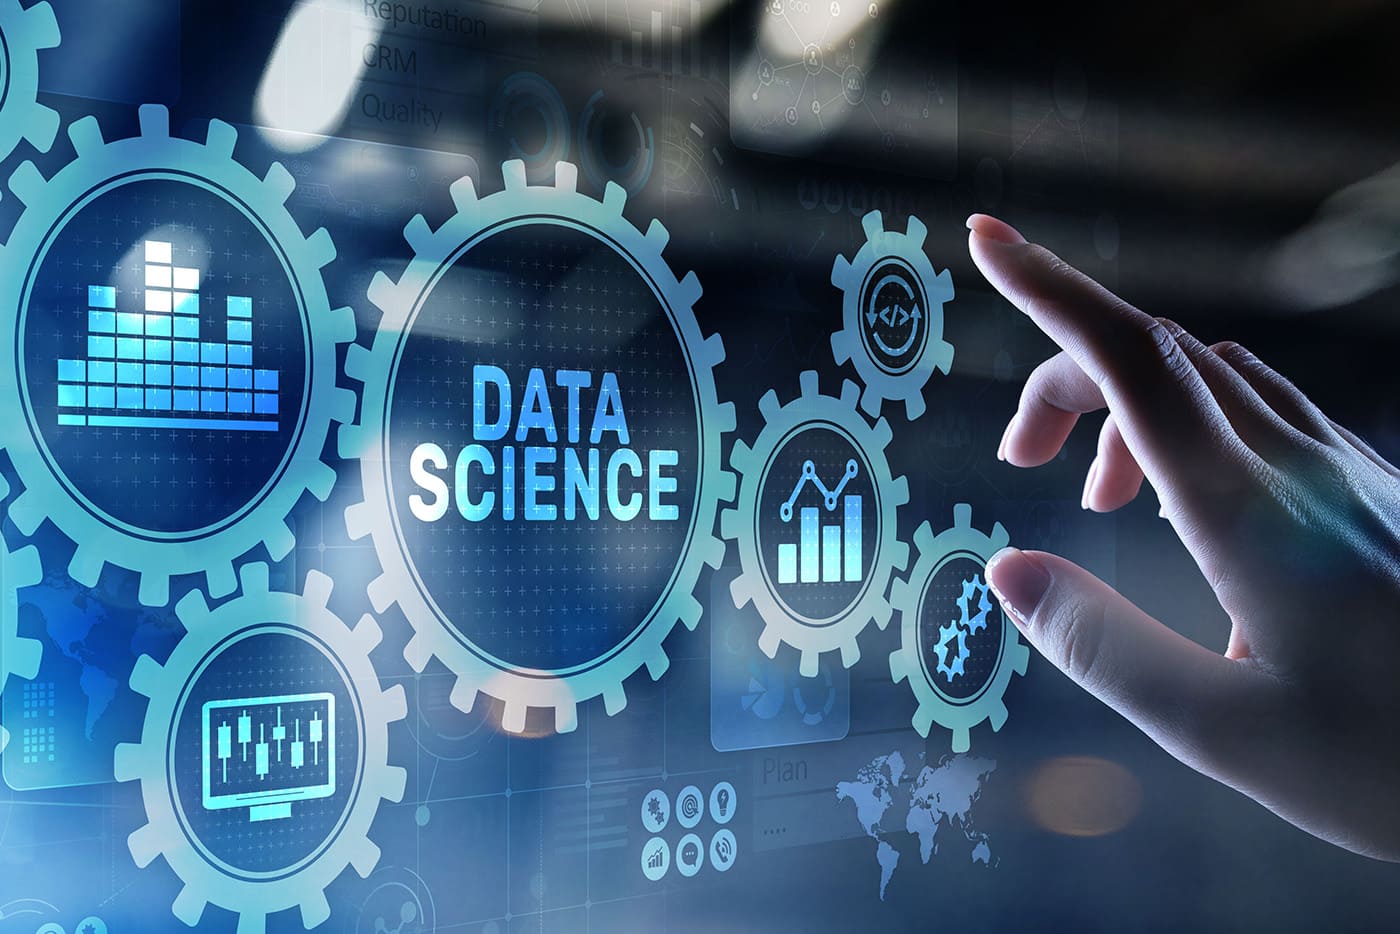 The Top 5 Data Science And Analytics Trends In 2023 | Bernard Marr